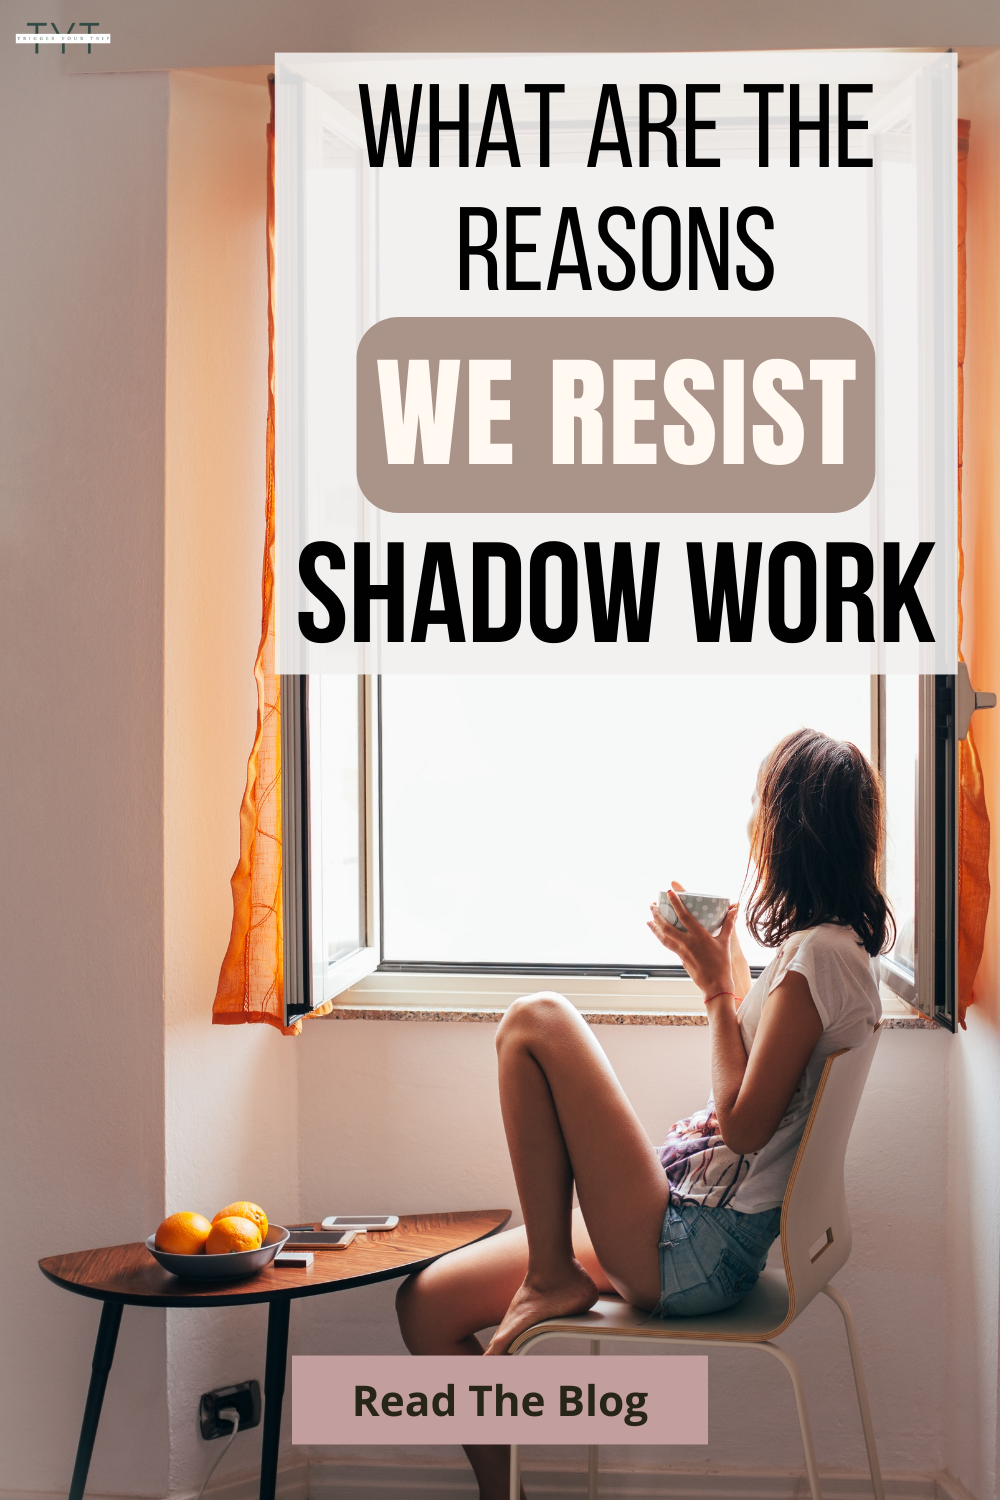 the reasons we resist shadow prompts, shadow work and our inner voice kind